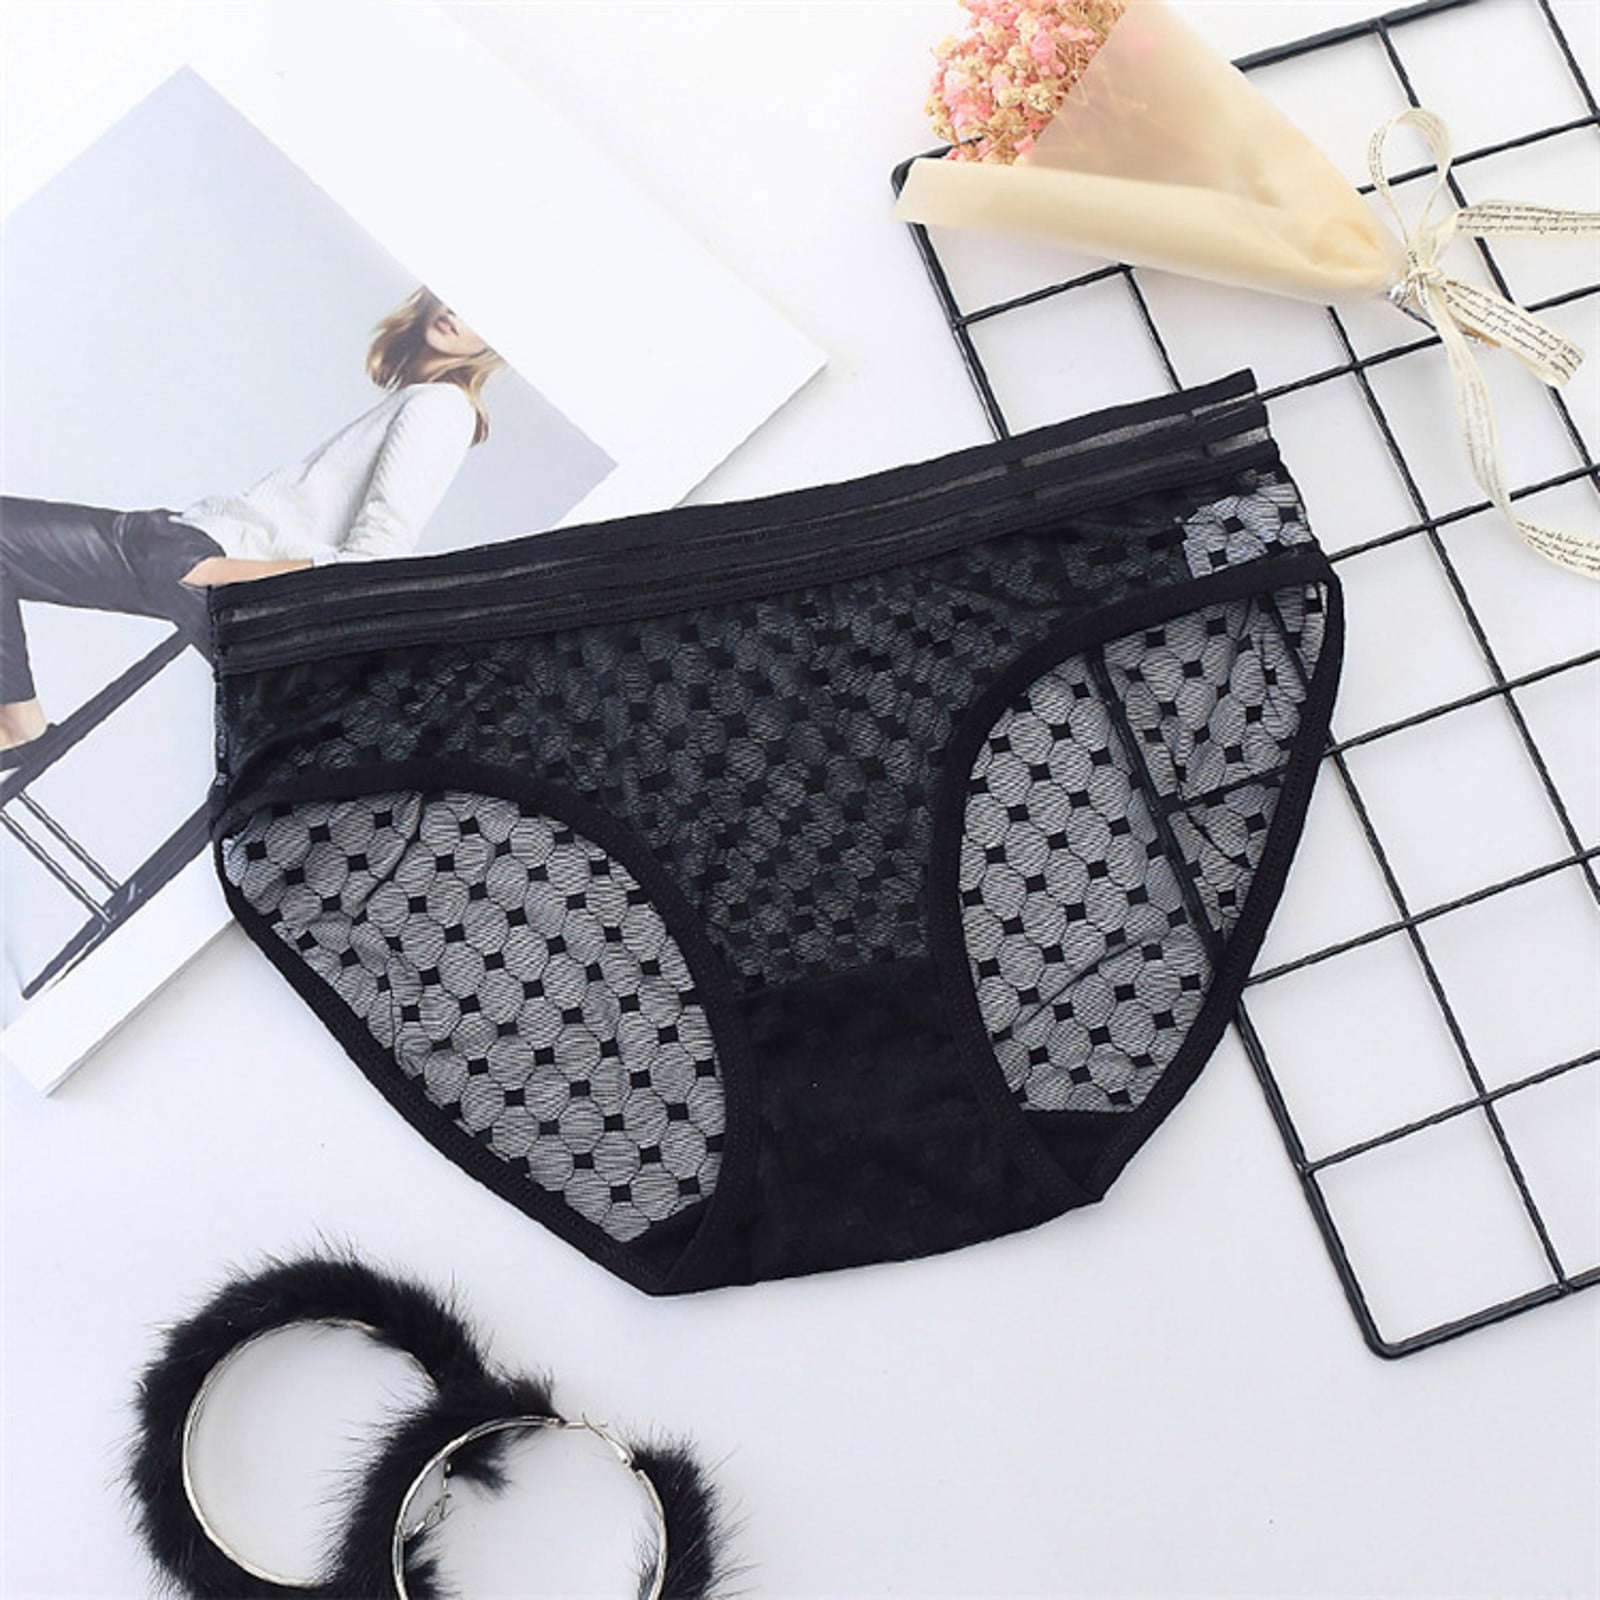 Aayomet Cotton Underwear for Women Womens Ultra Thin Transparent Panties  Seamless Comfortable Breathable Ladies Low Waist,Black M